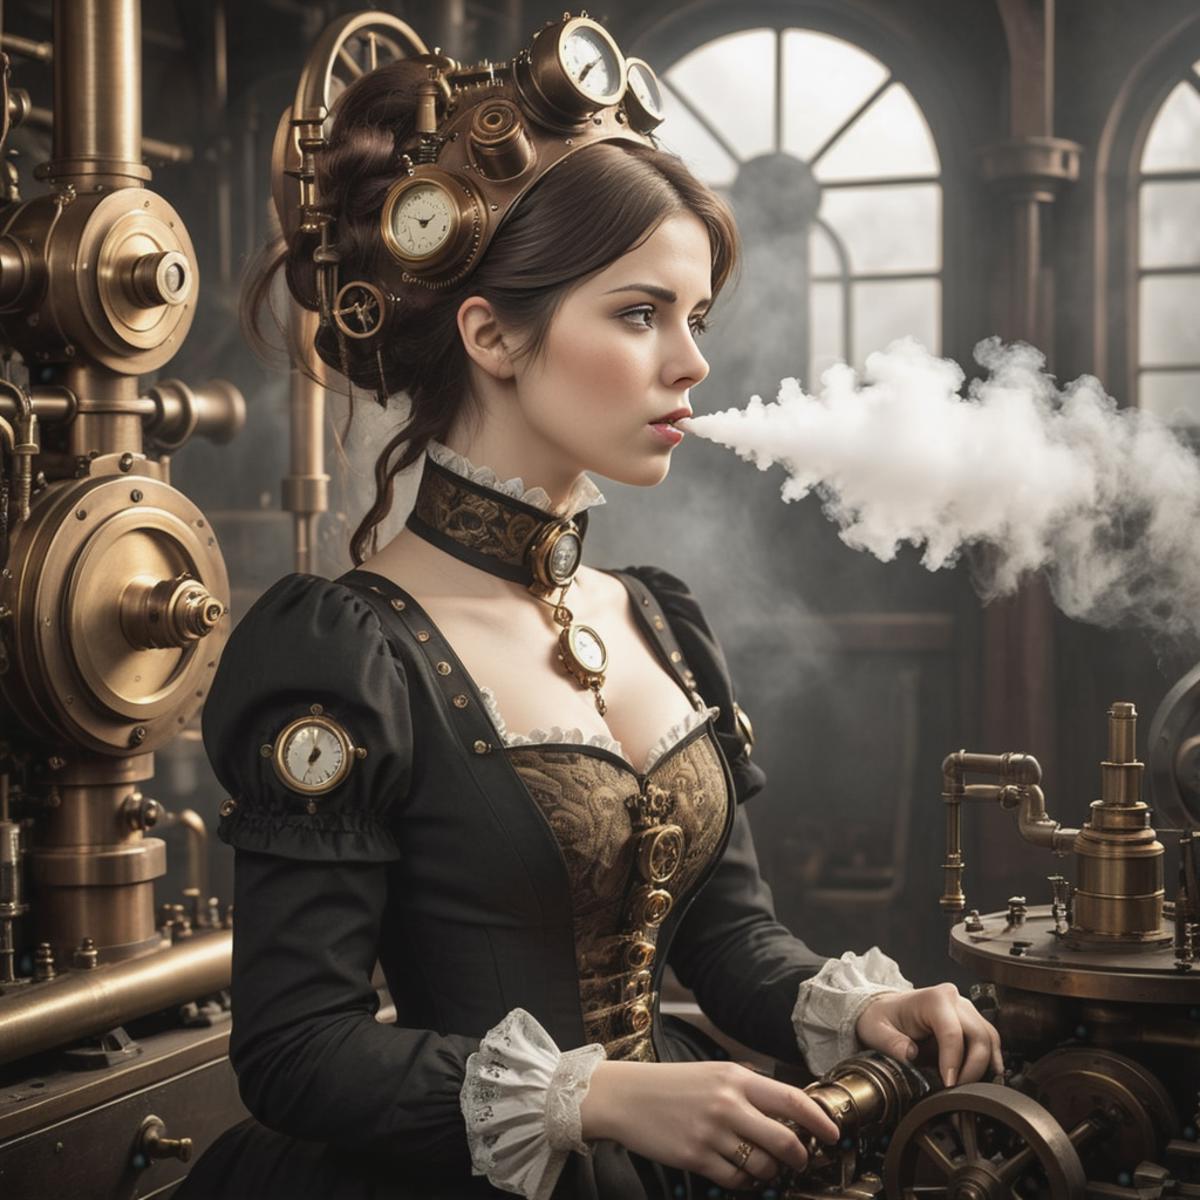 A woman in a steampunk costume blowing smoke from her mouth.